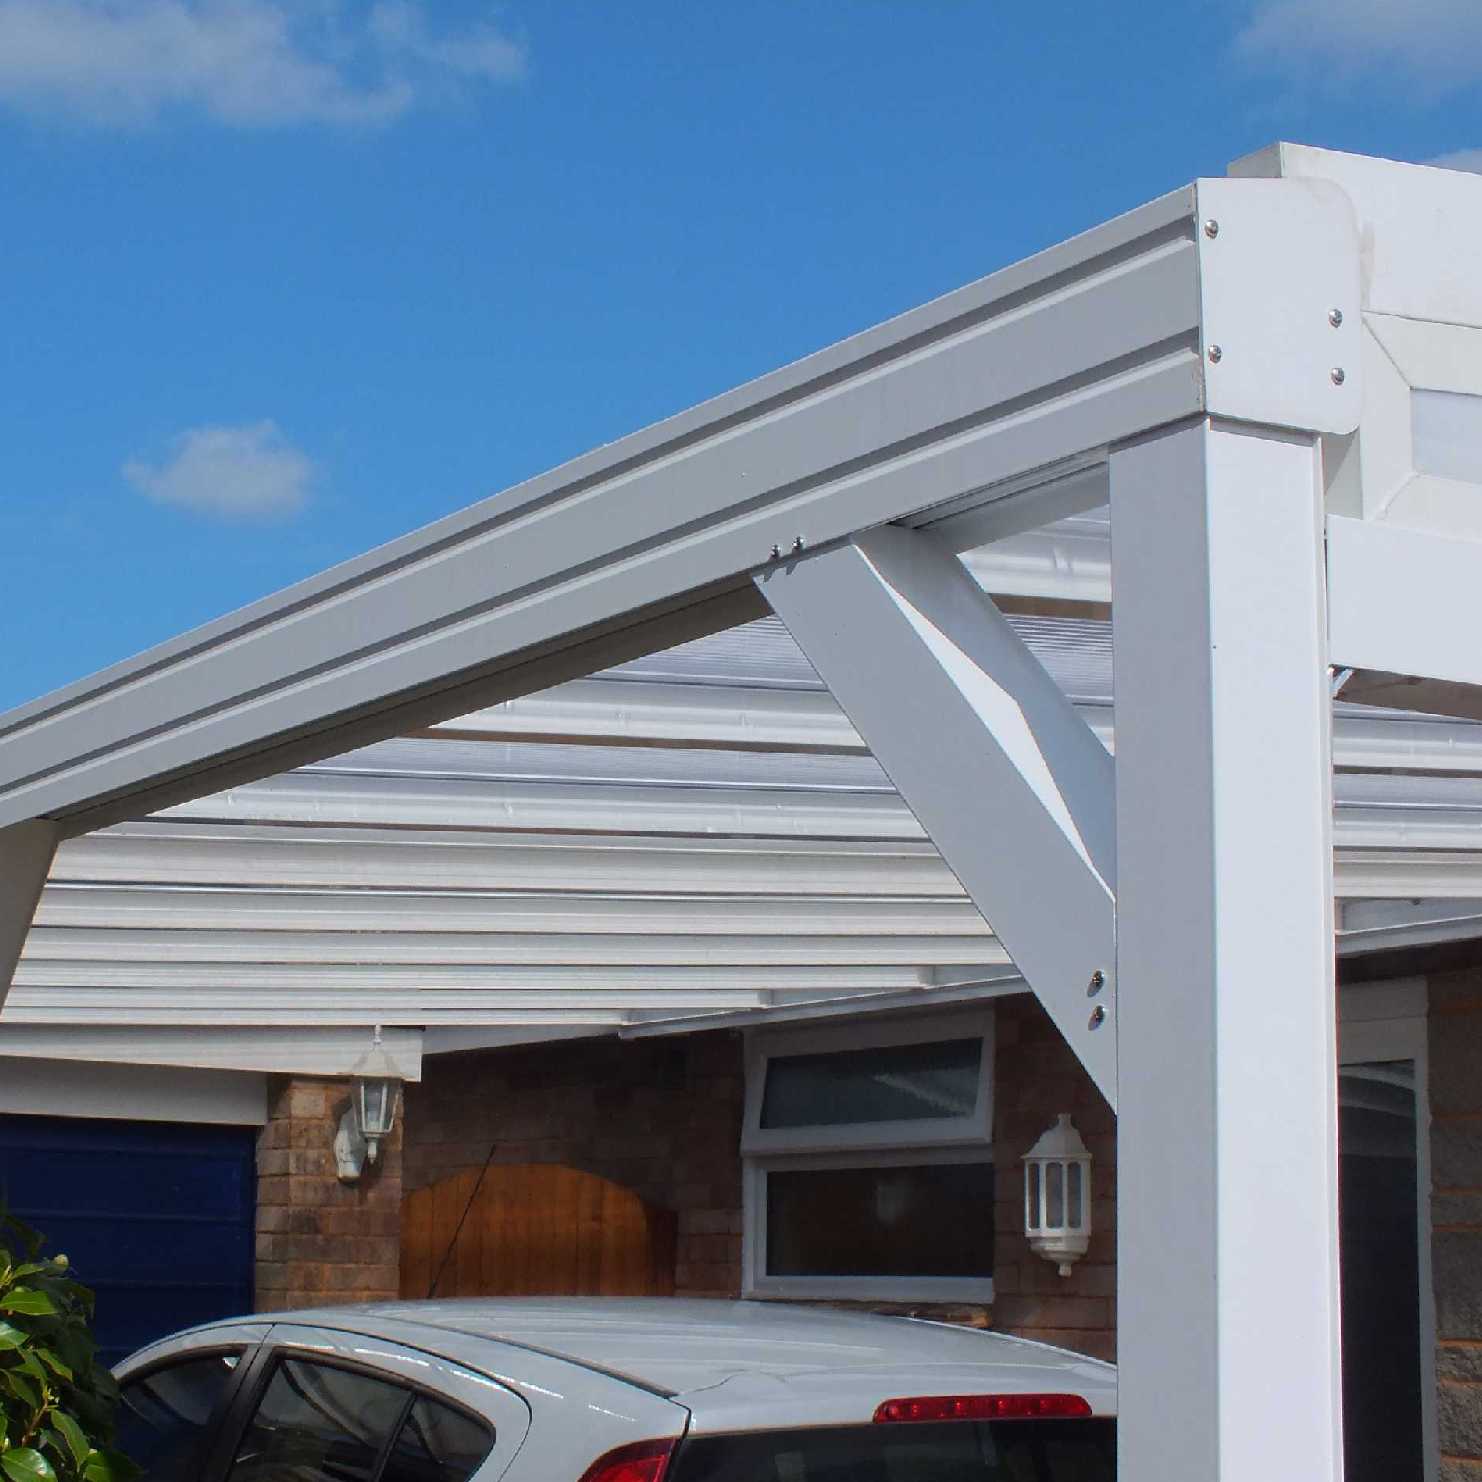 Buy Omega Smart Lean-To Canopy, White with 16mm Polycarbonate Glazing - 7.0m (W) x 4.0m (P), (4) Supporting Posts online today